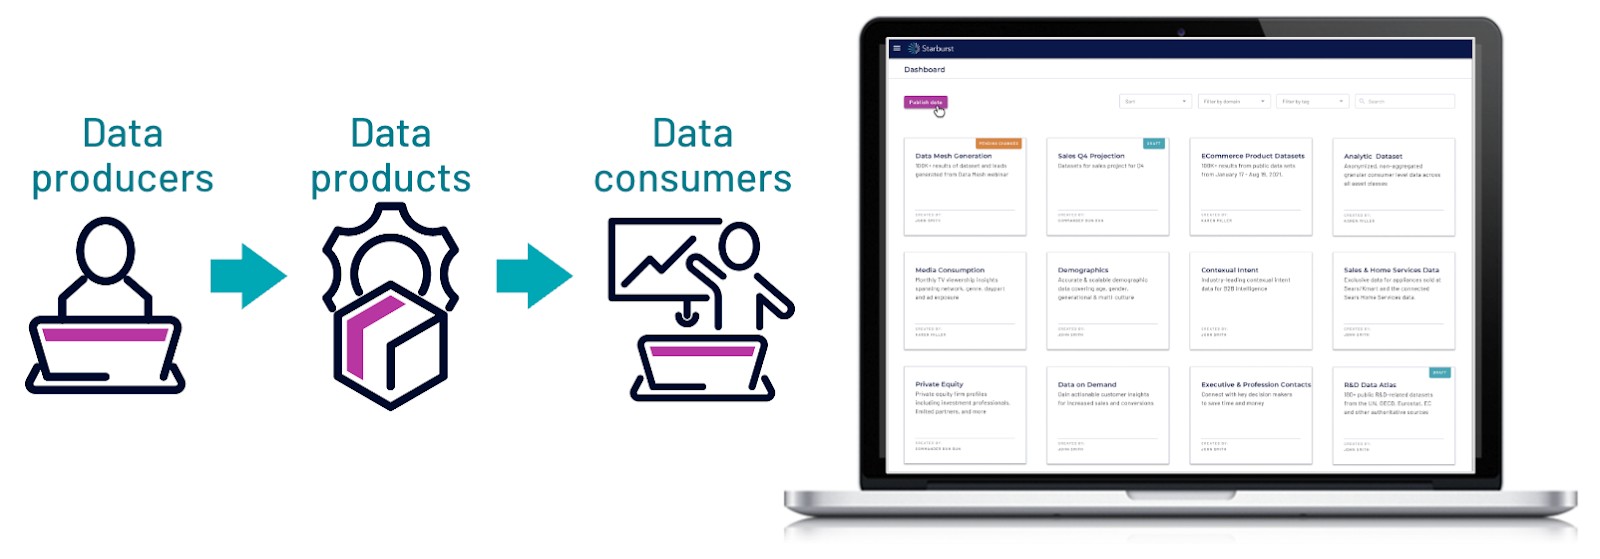 Data Producers - Data Products - Data Consumers